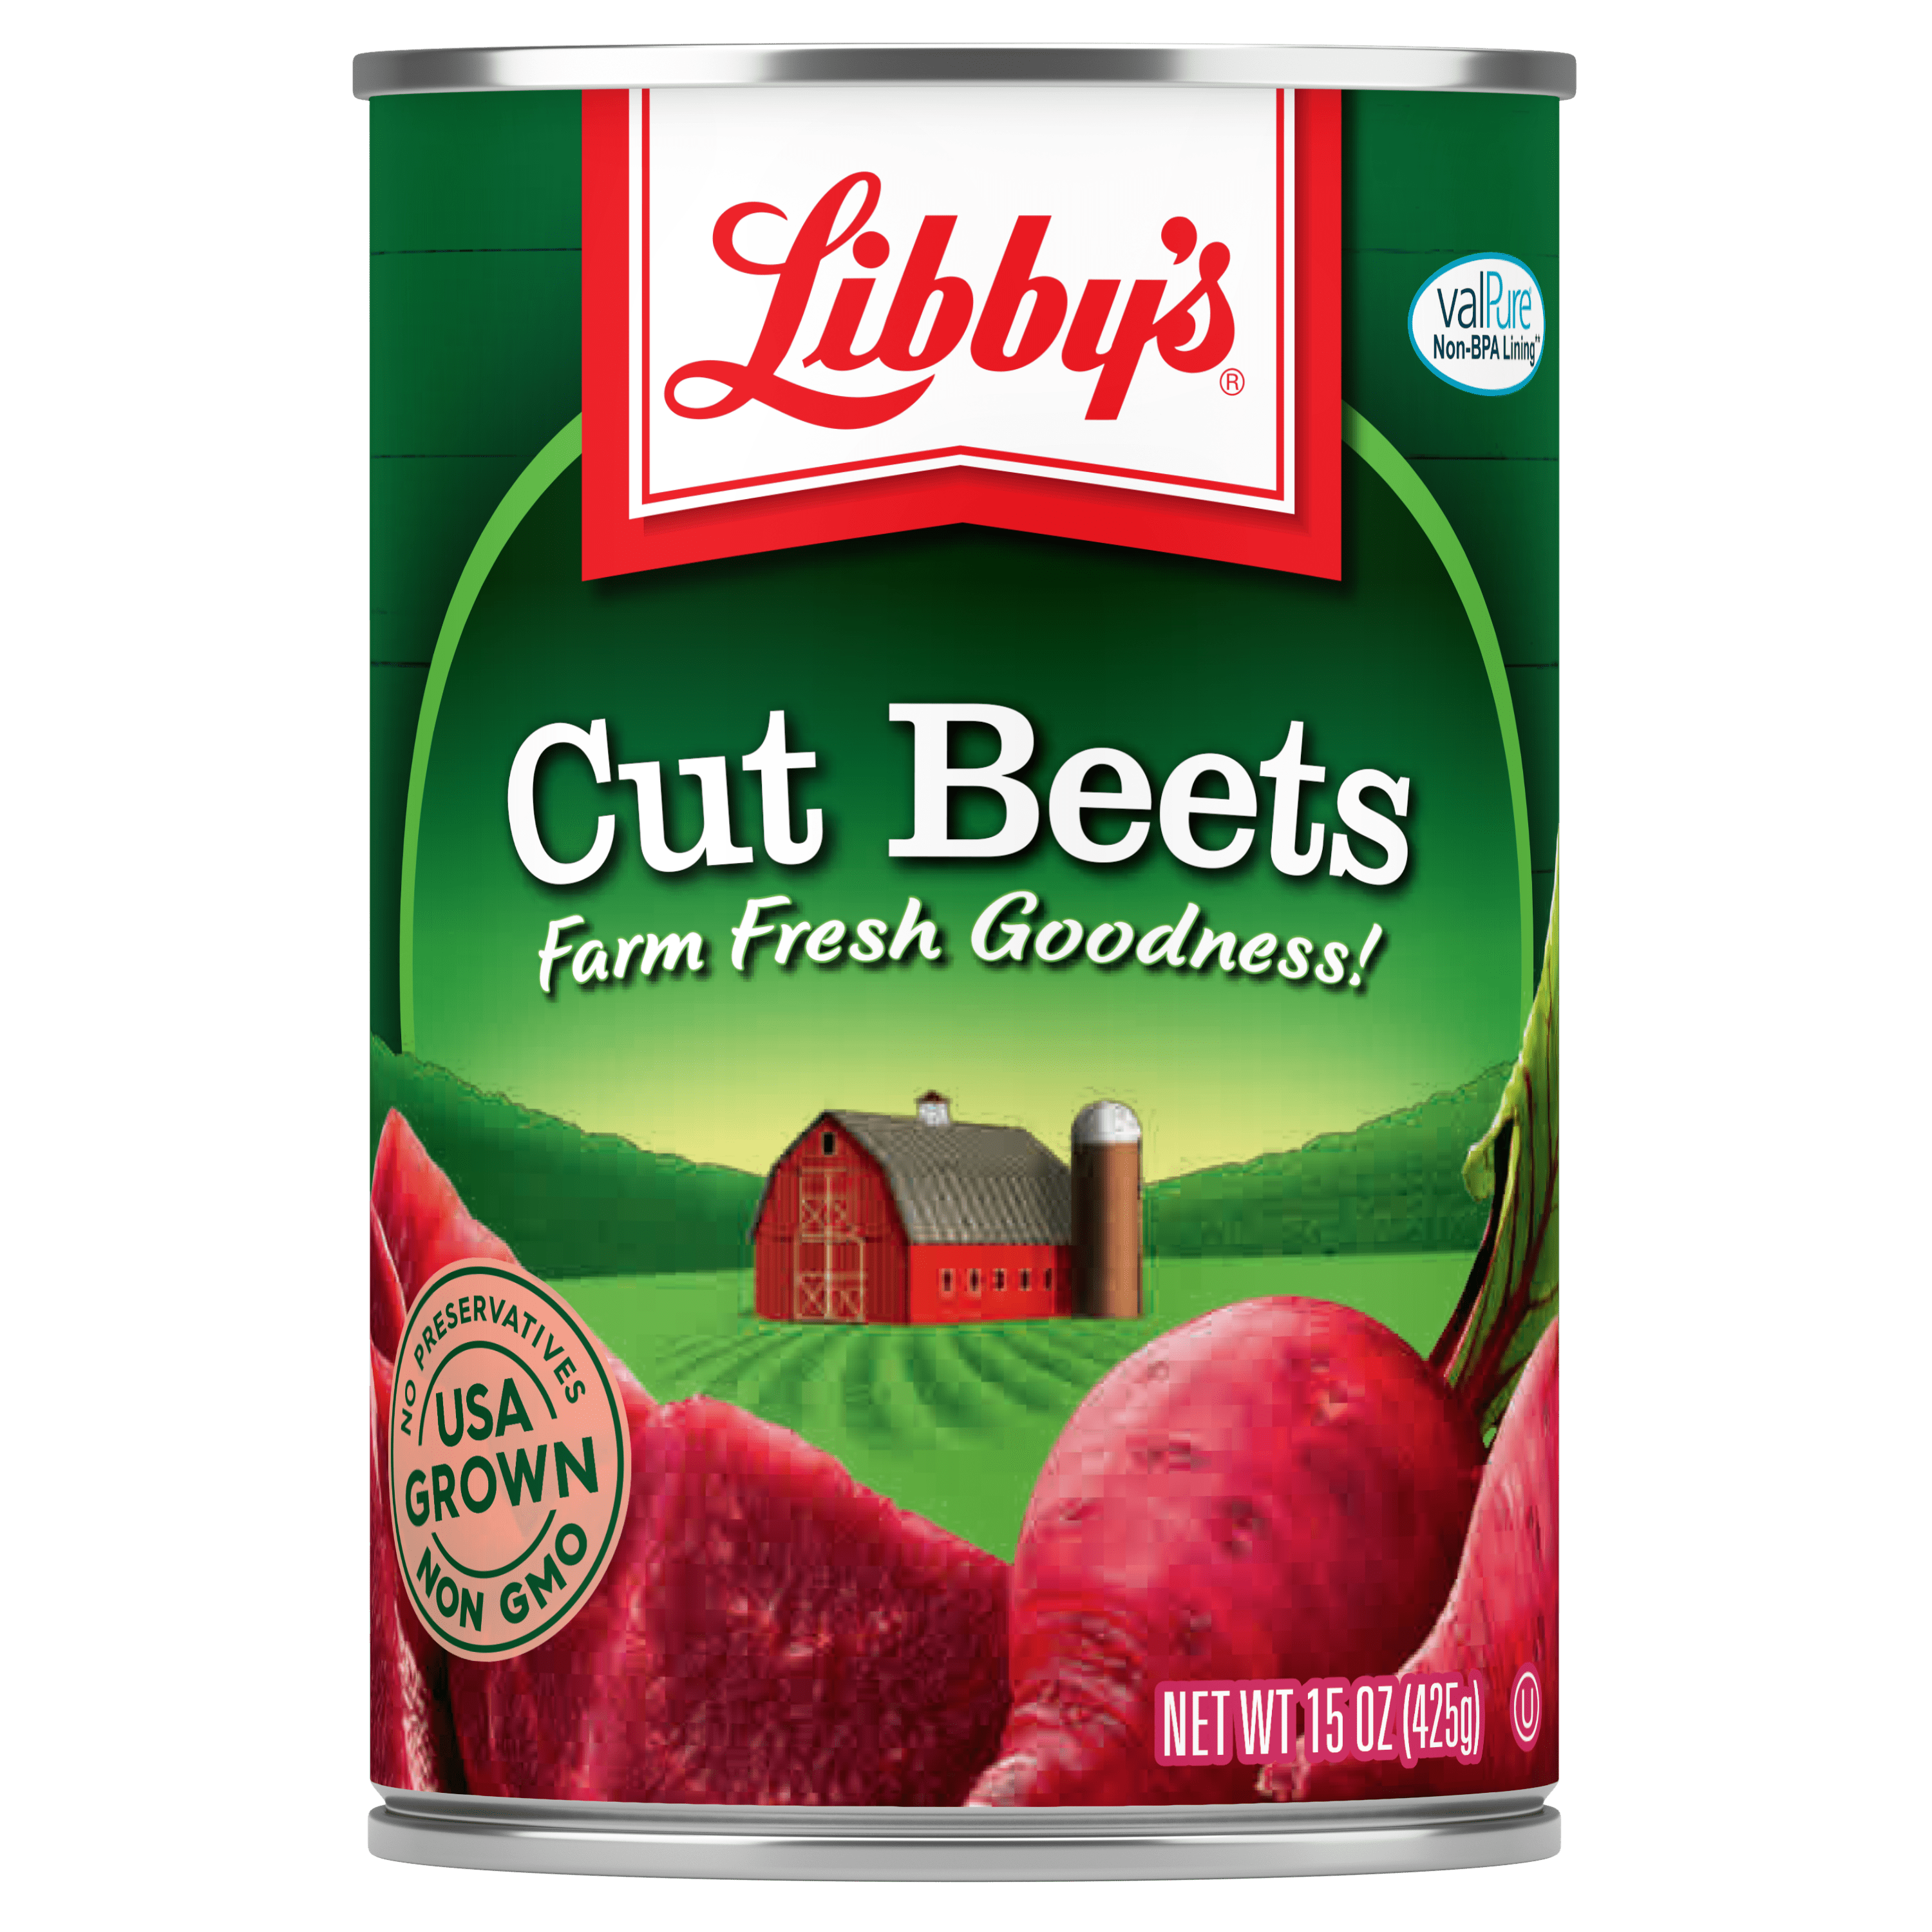 Libby's Cut Beets, 15 oz. can, canned beets